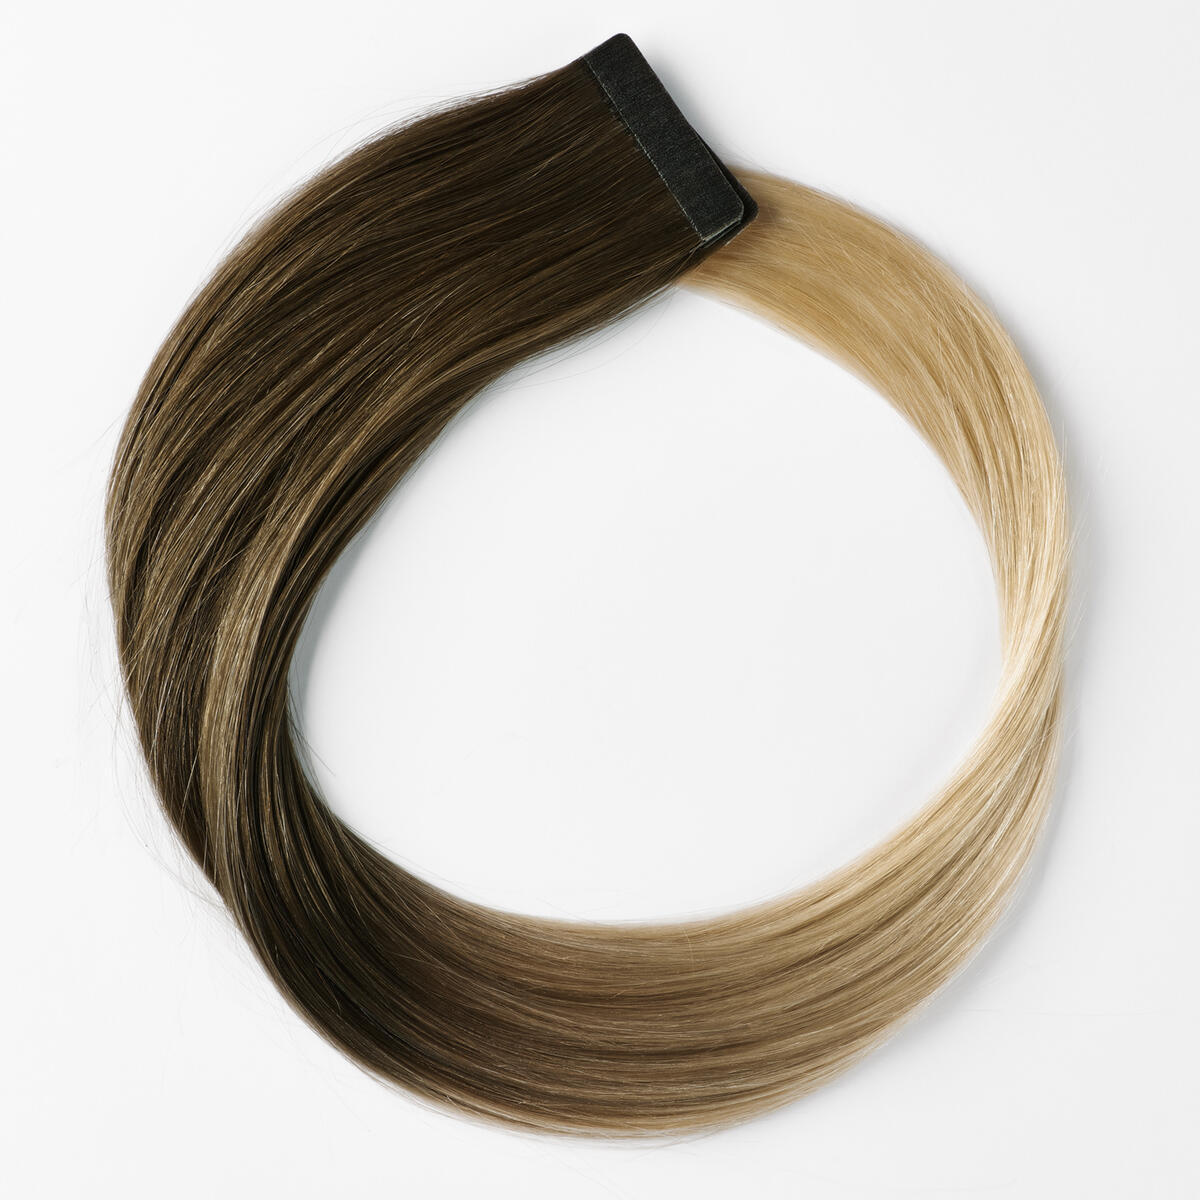 Basic Tape Extensions Classic 4 O2.6/8.0 Dark Ash Blond Ombre 60 cm